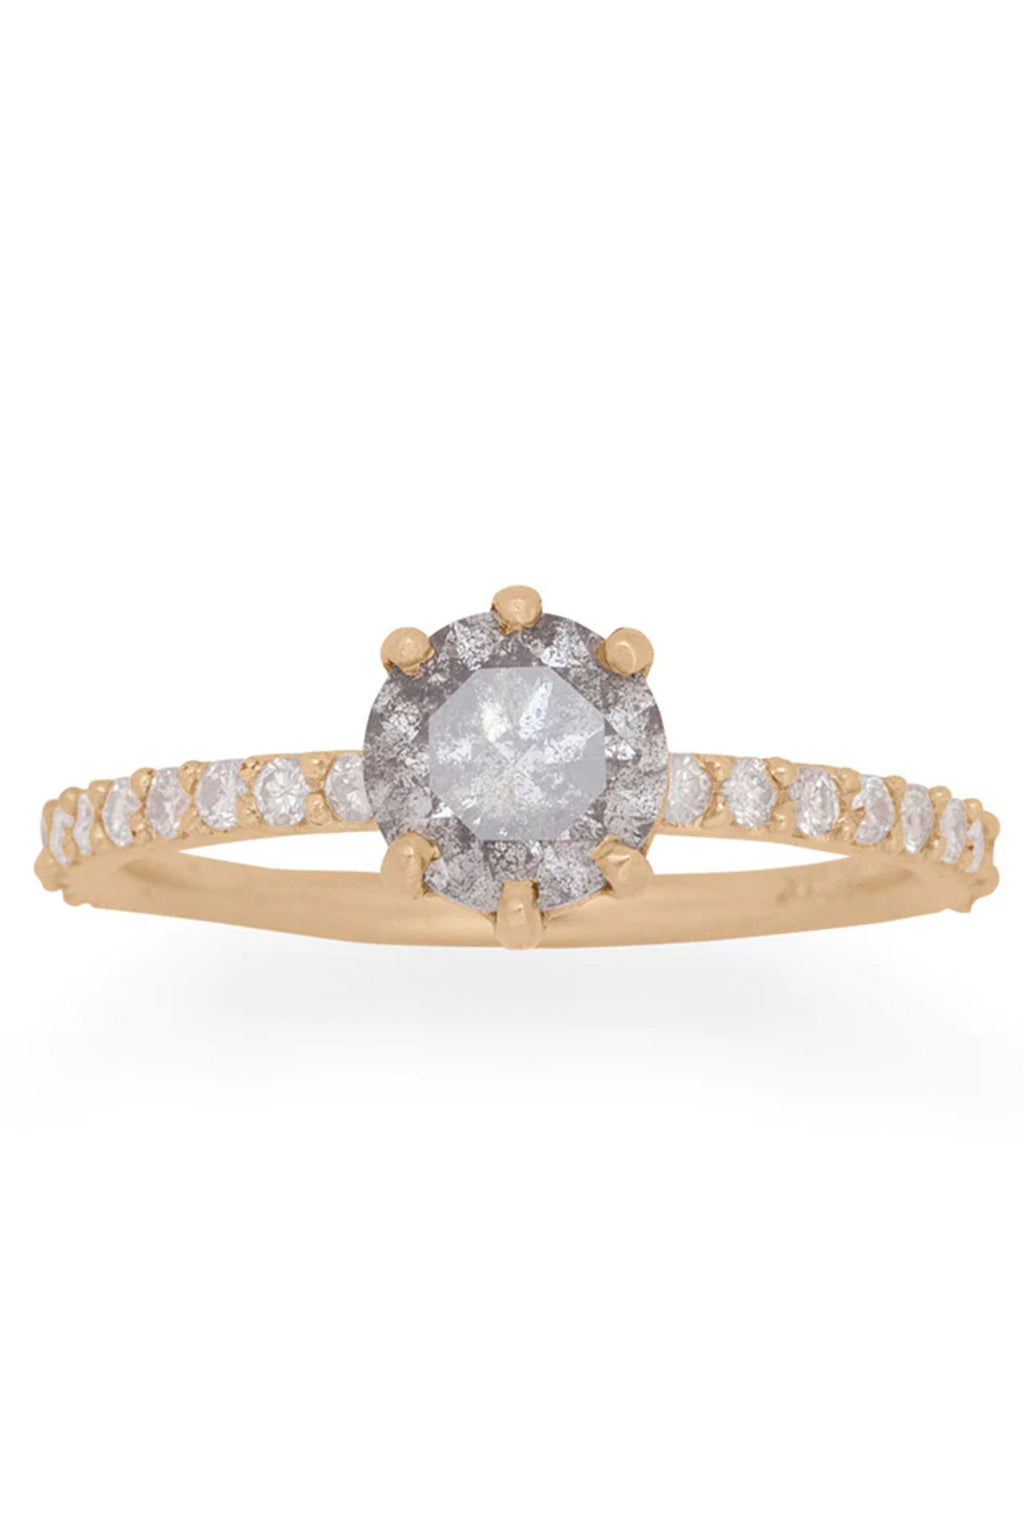 Valley Rose Chloe Ring with a Grey Diamond and White Diamonds